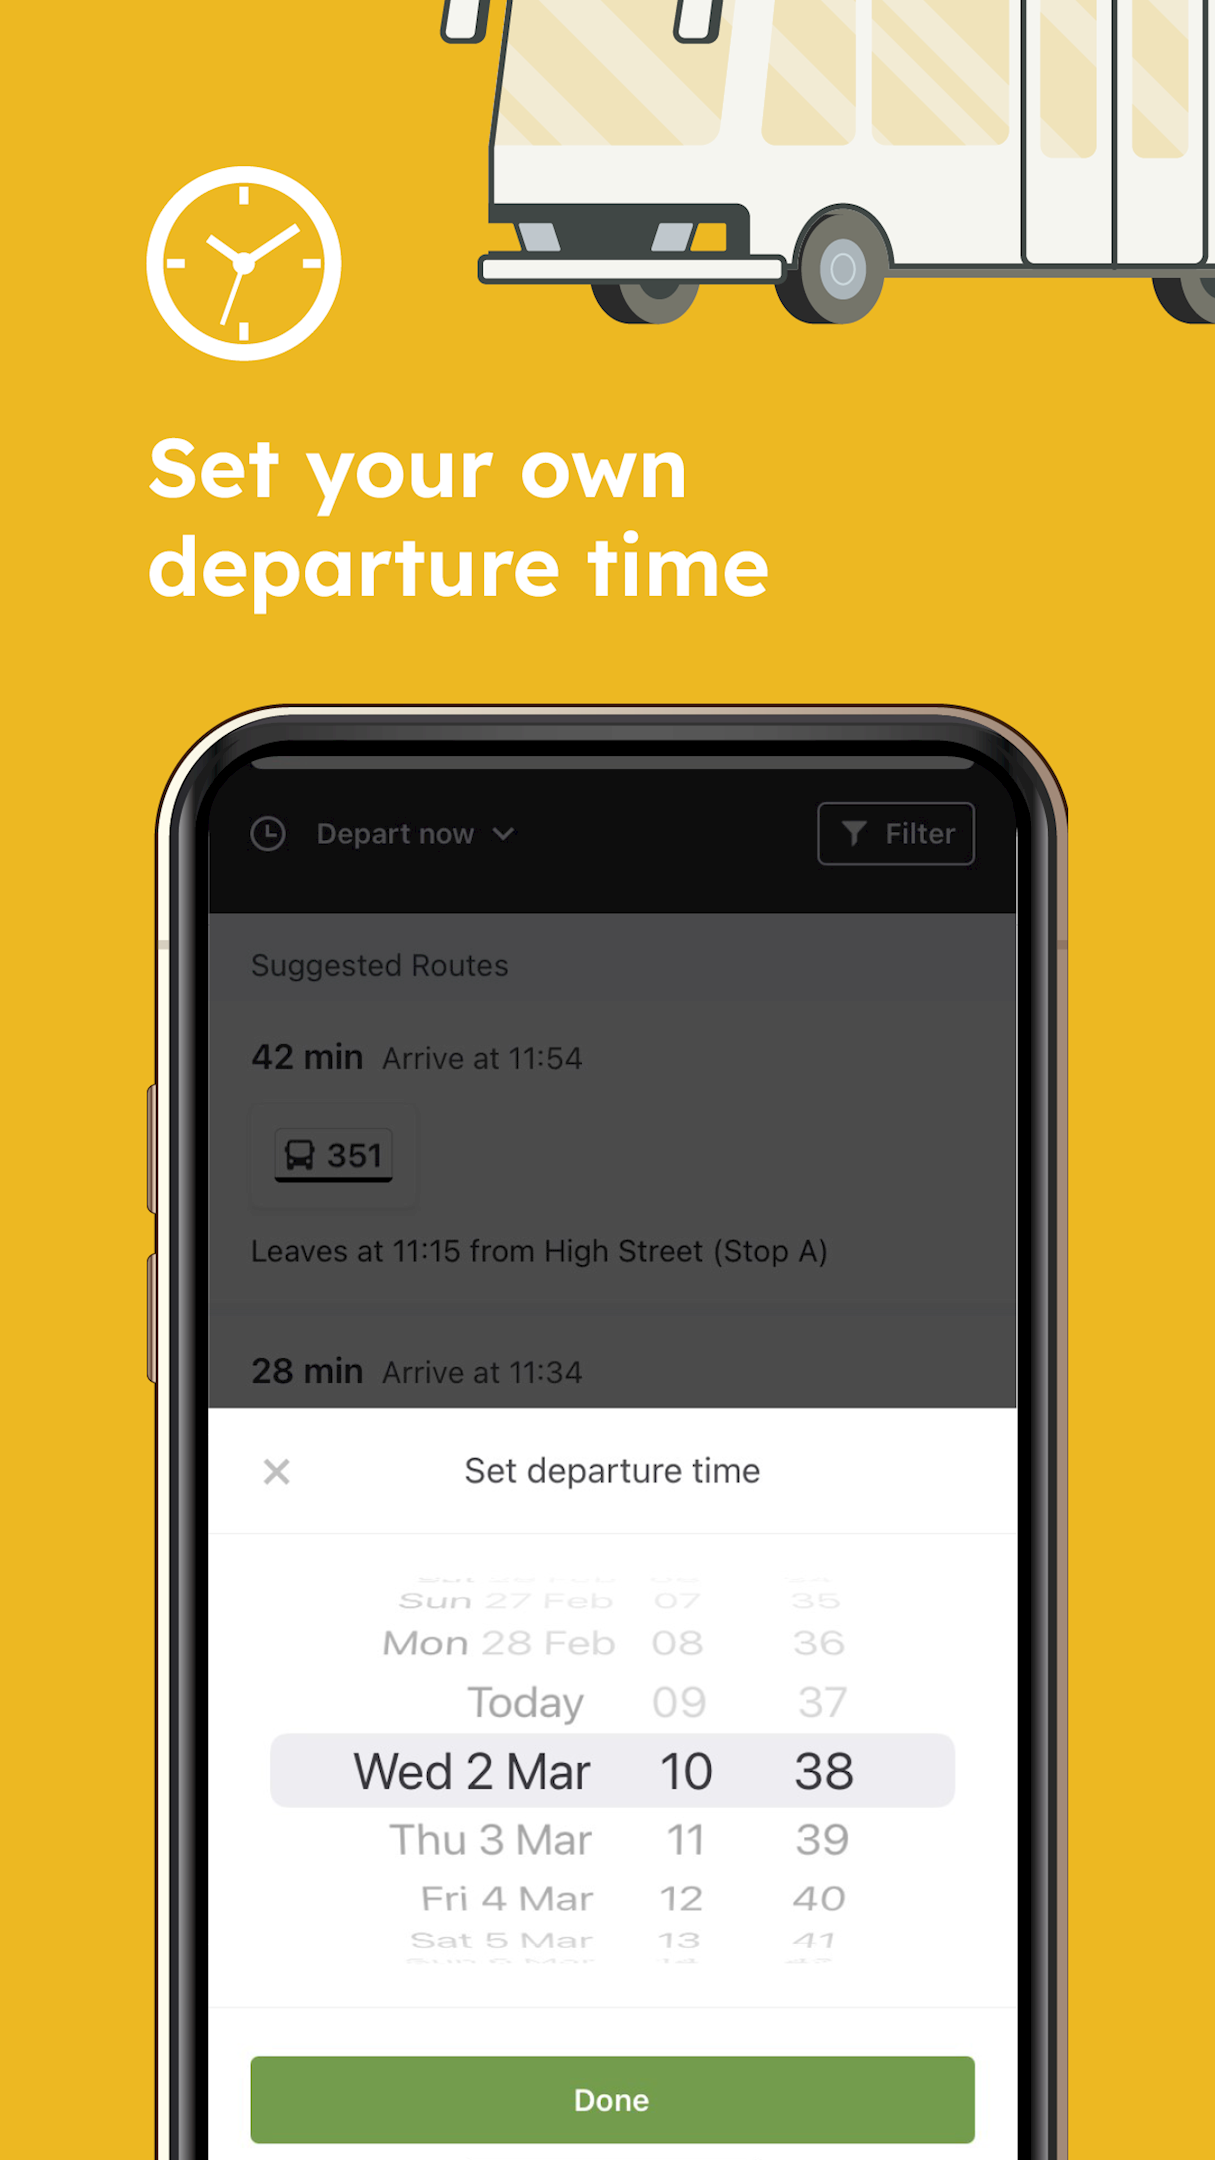 Set your own departure time